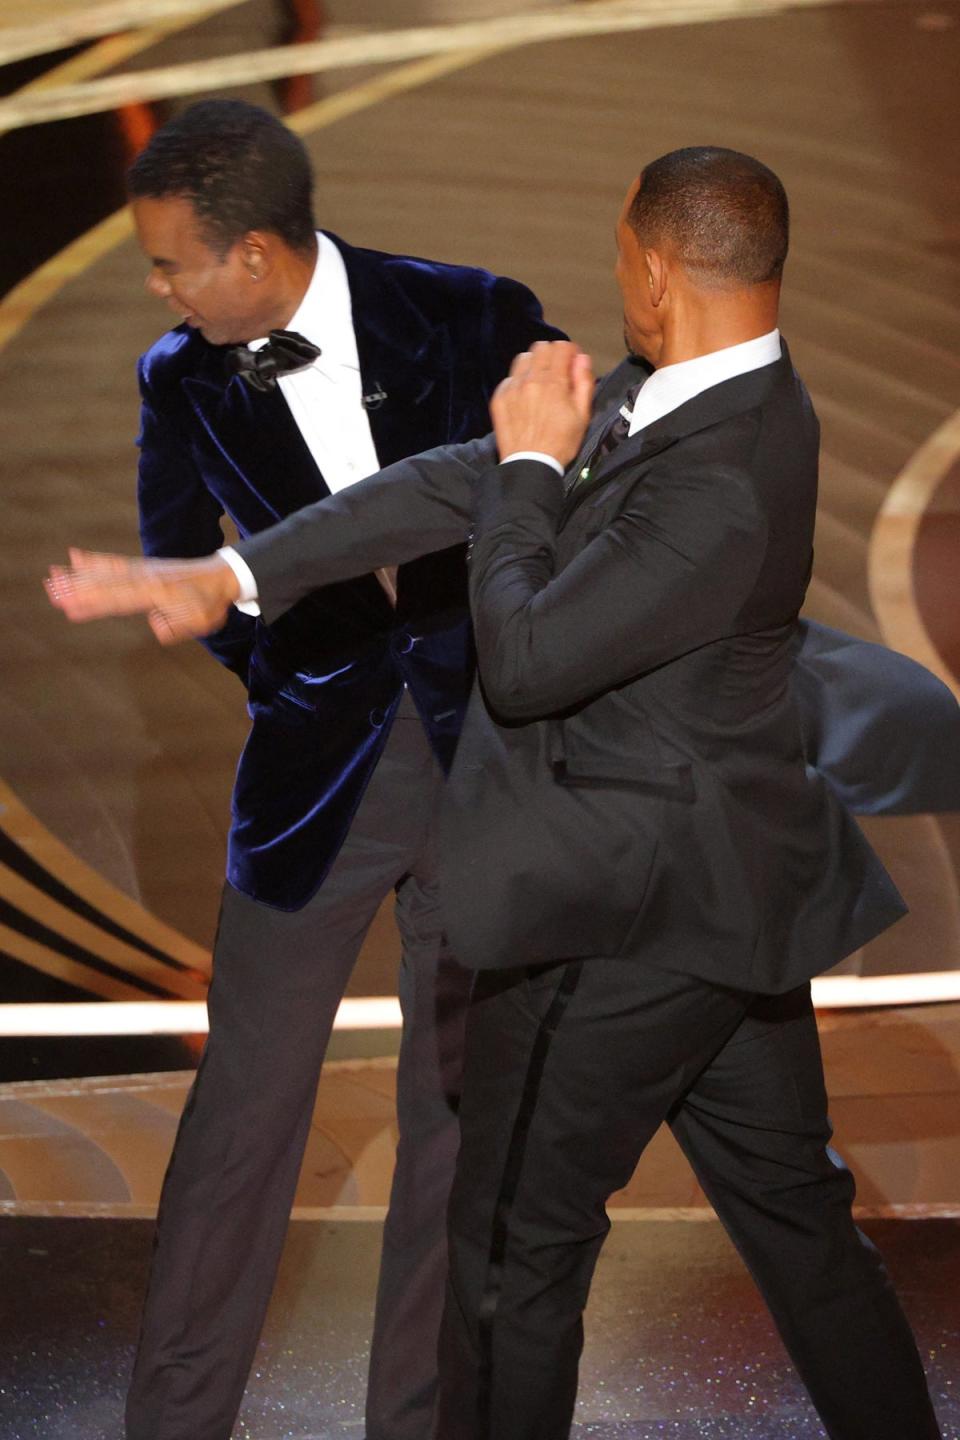 Smith infamously slapped Chris Rock on stage during the 94th Academy Awards in March (Reuters)